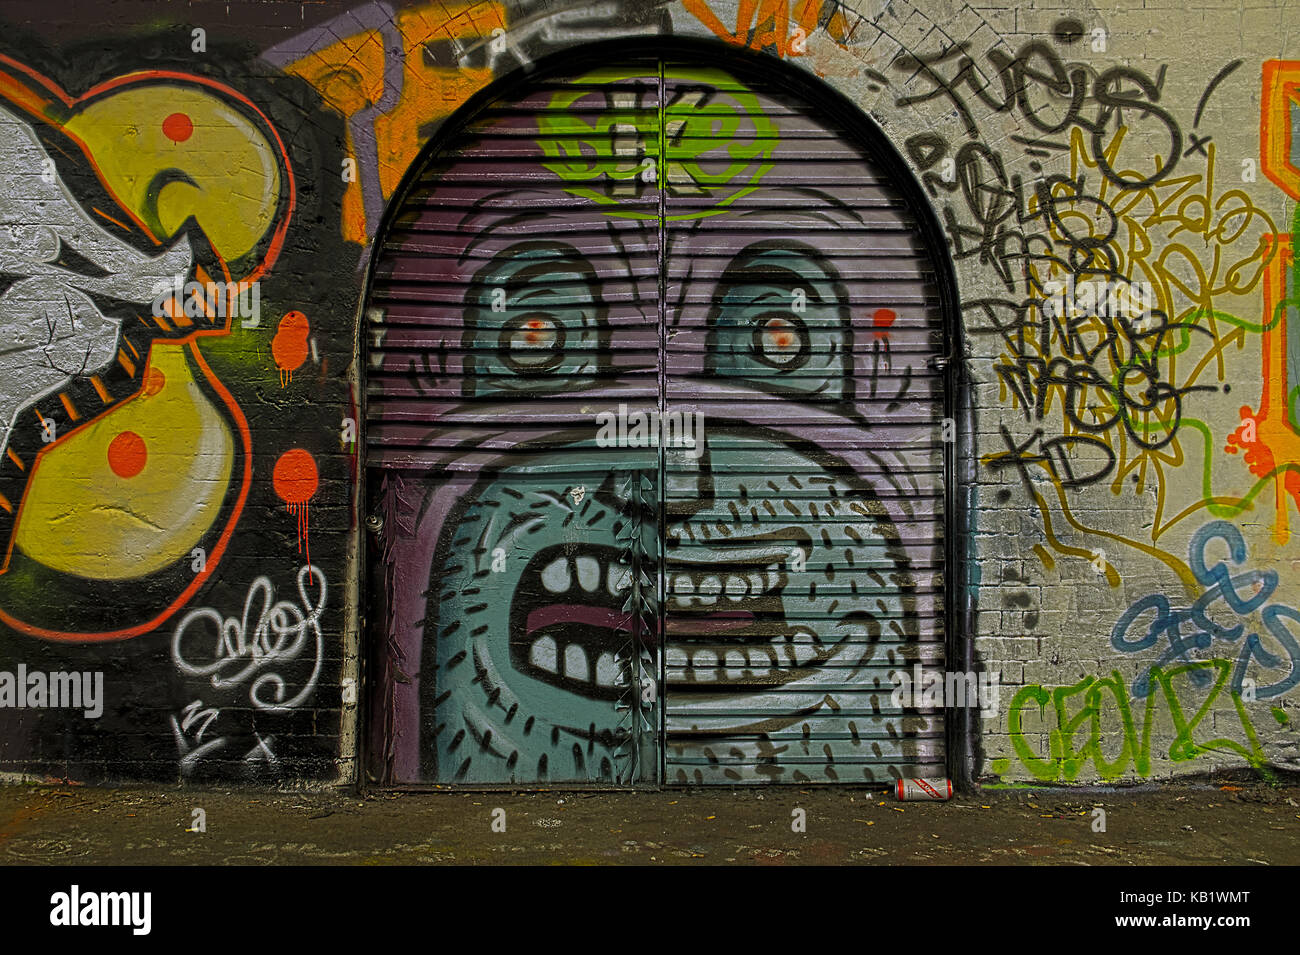 London Graffiti along Leake Street Tunnel, Also known as Bansy Tunnel in Lambeth, London, England UK Stock Photo